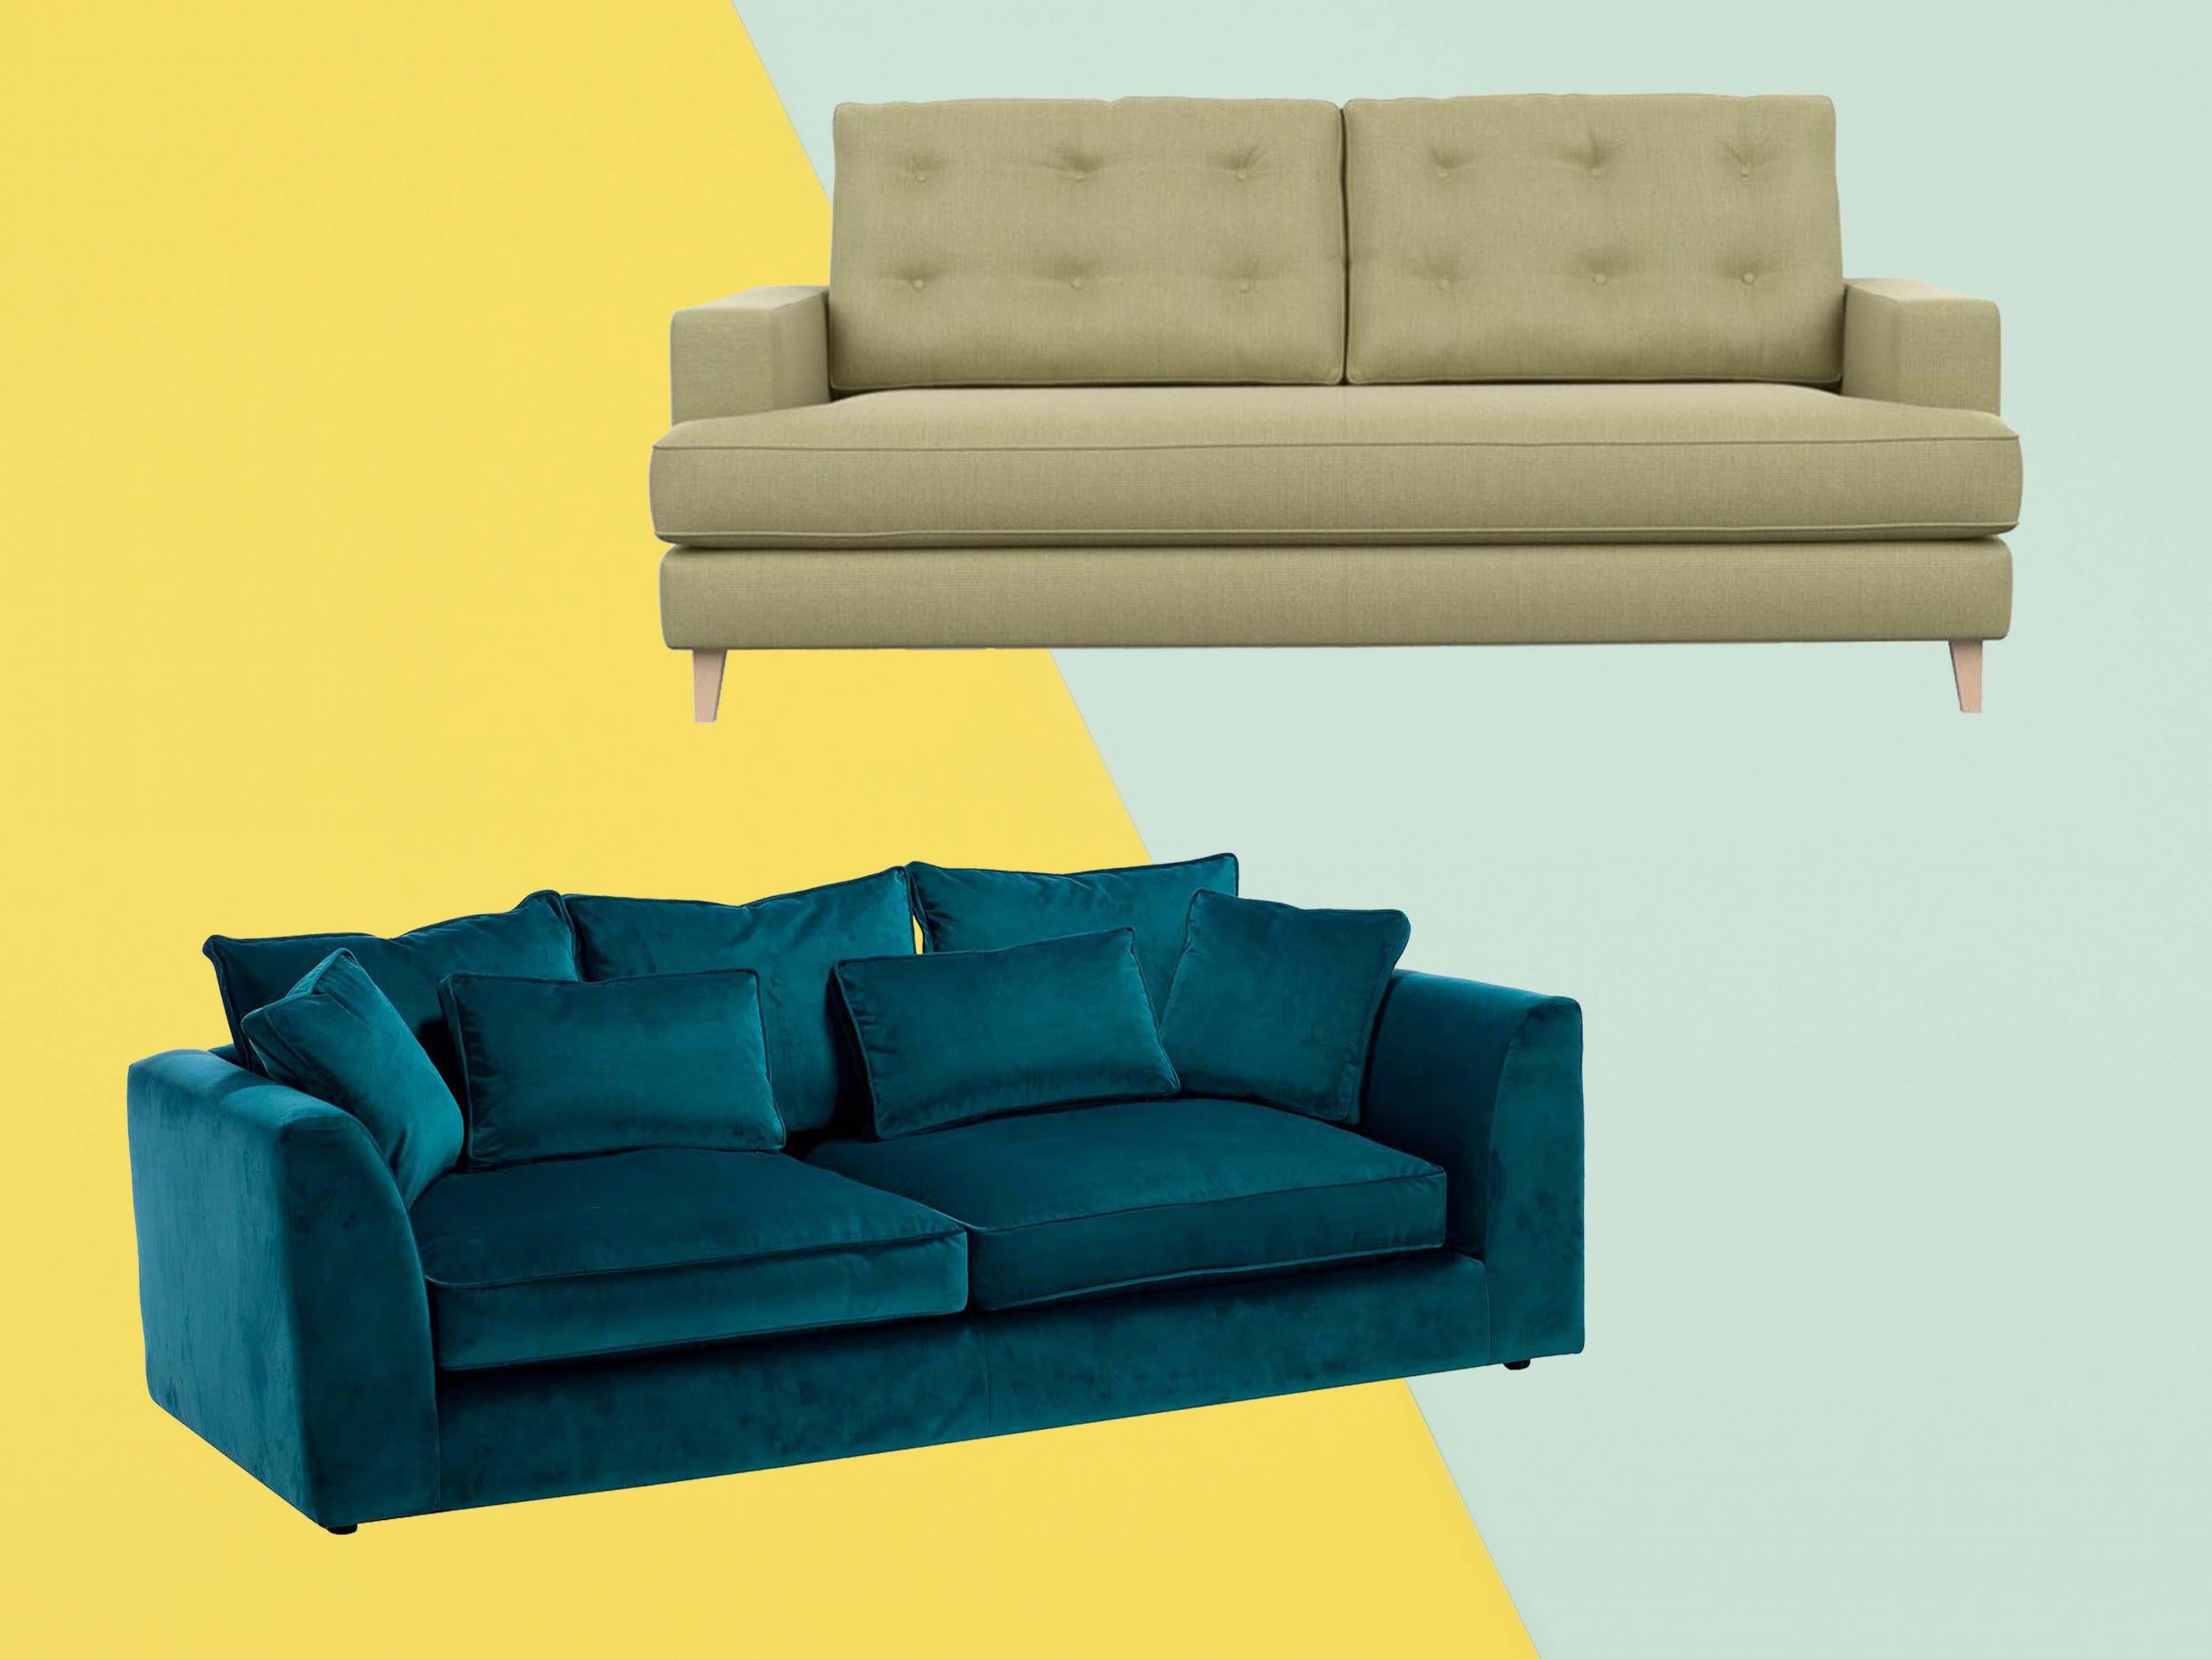 Best fabric for sofa